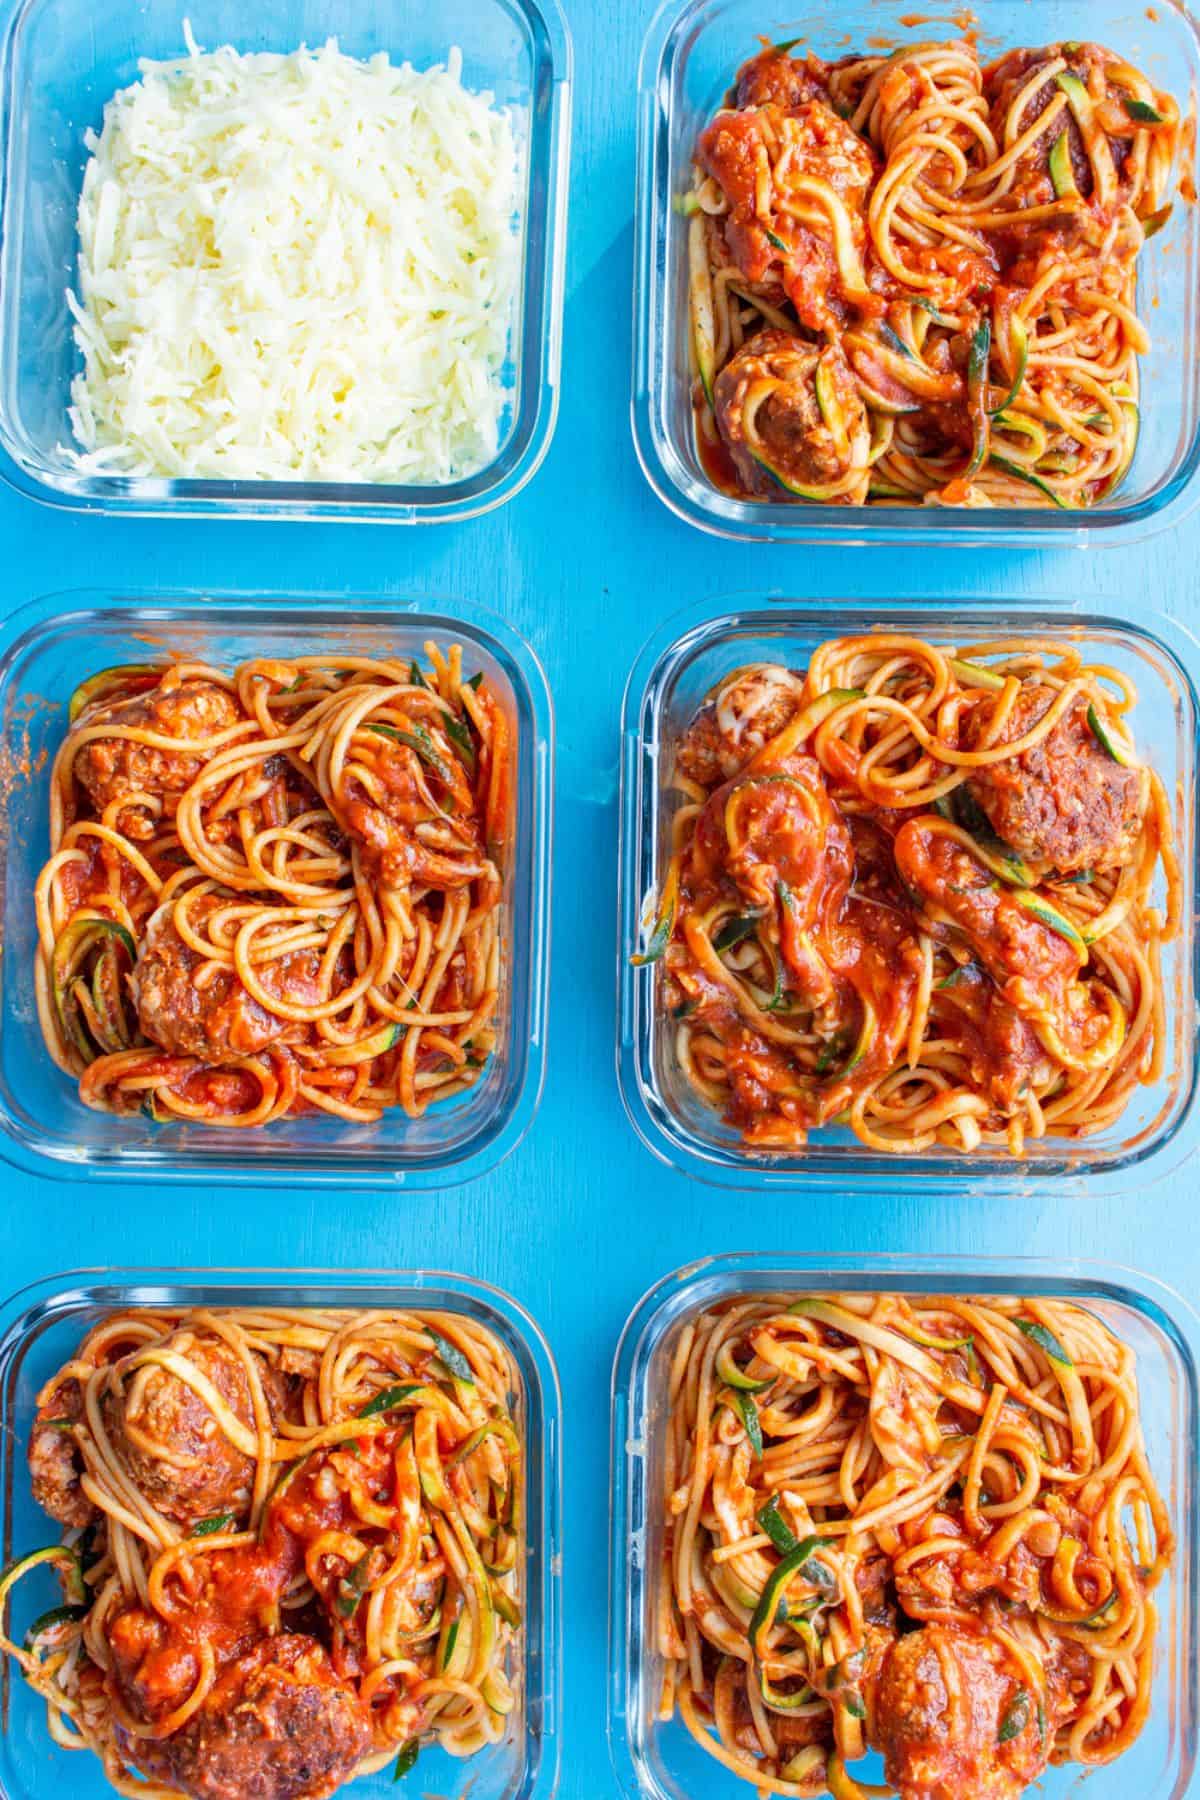 6 square glass meal prep containers, one with grated cheese and the other with meatball marinara and spaghetti in containers.